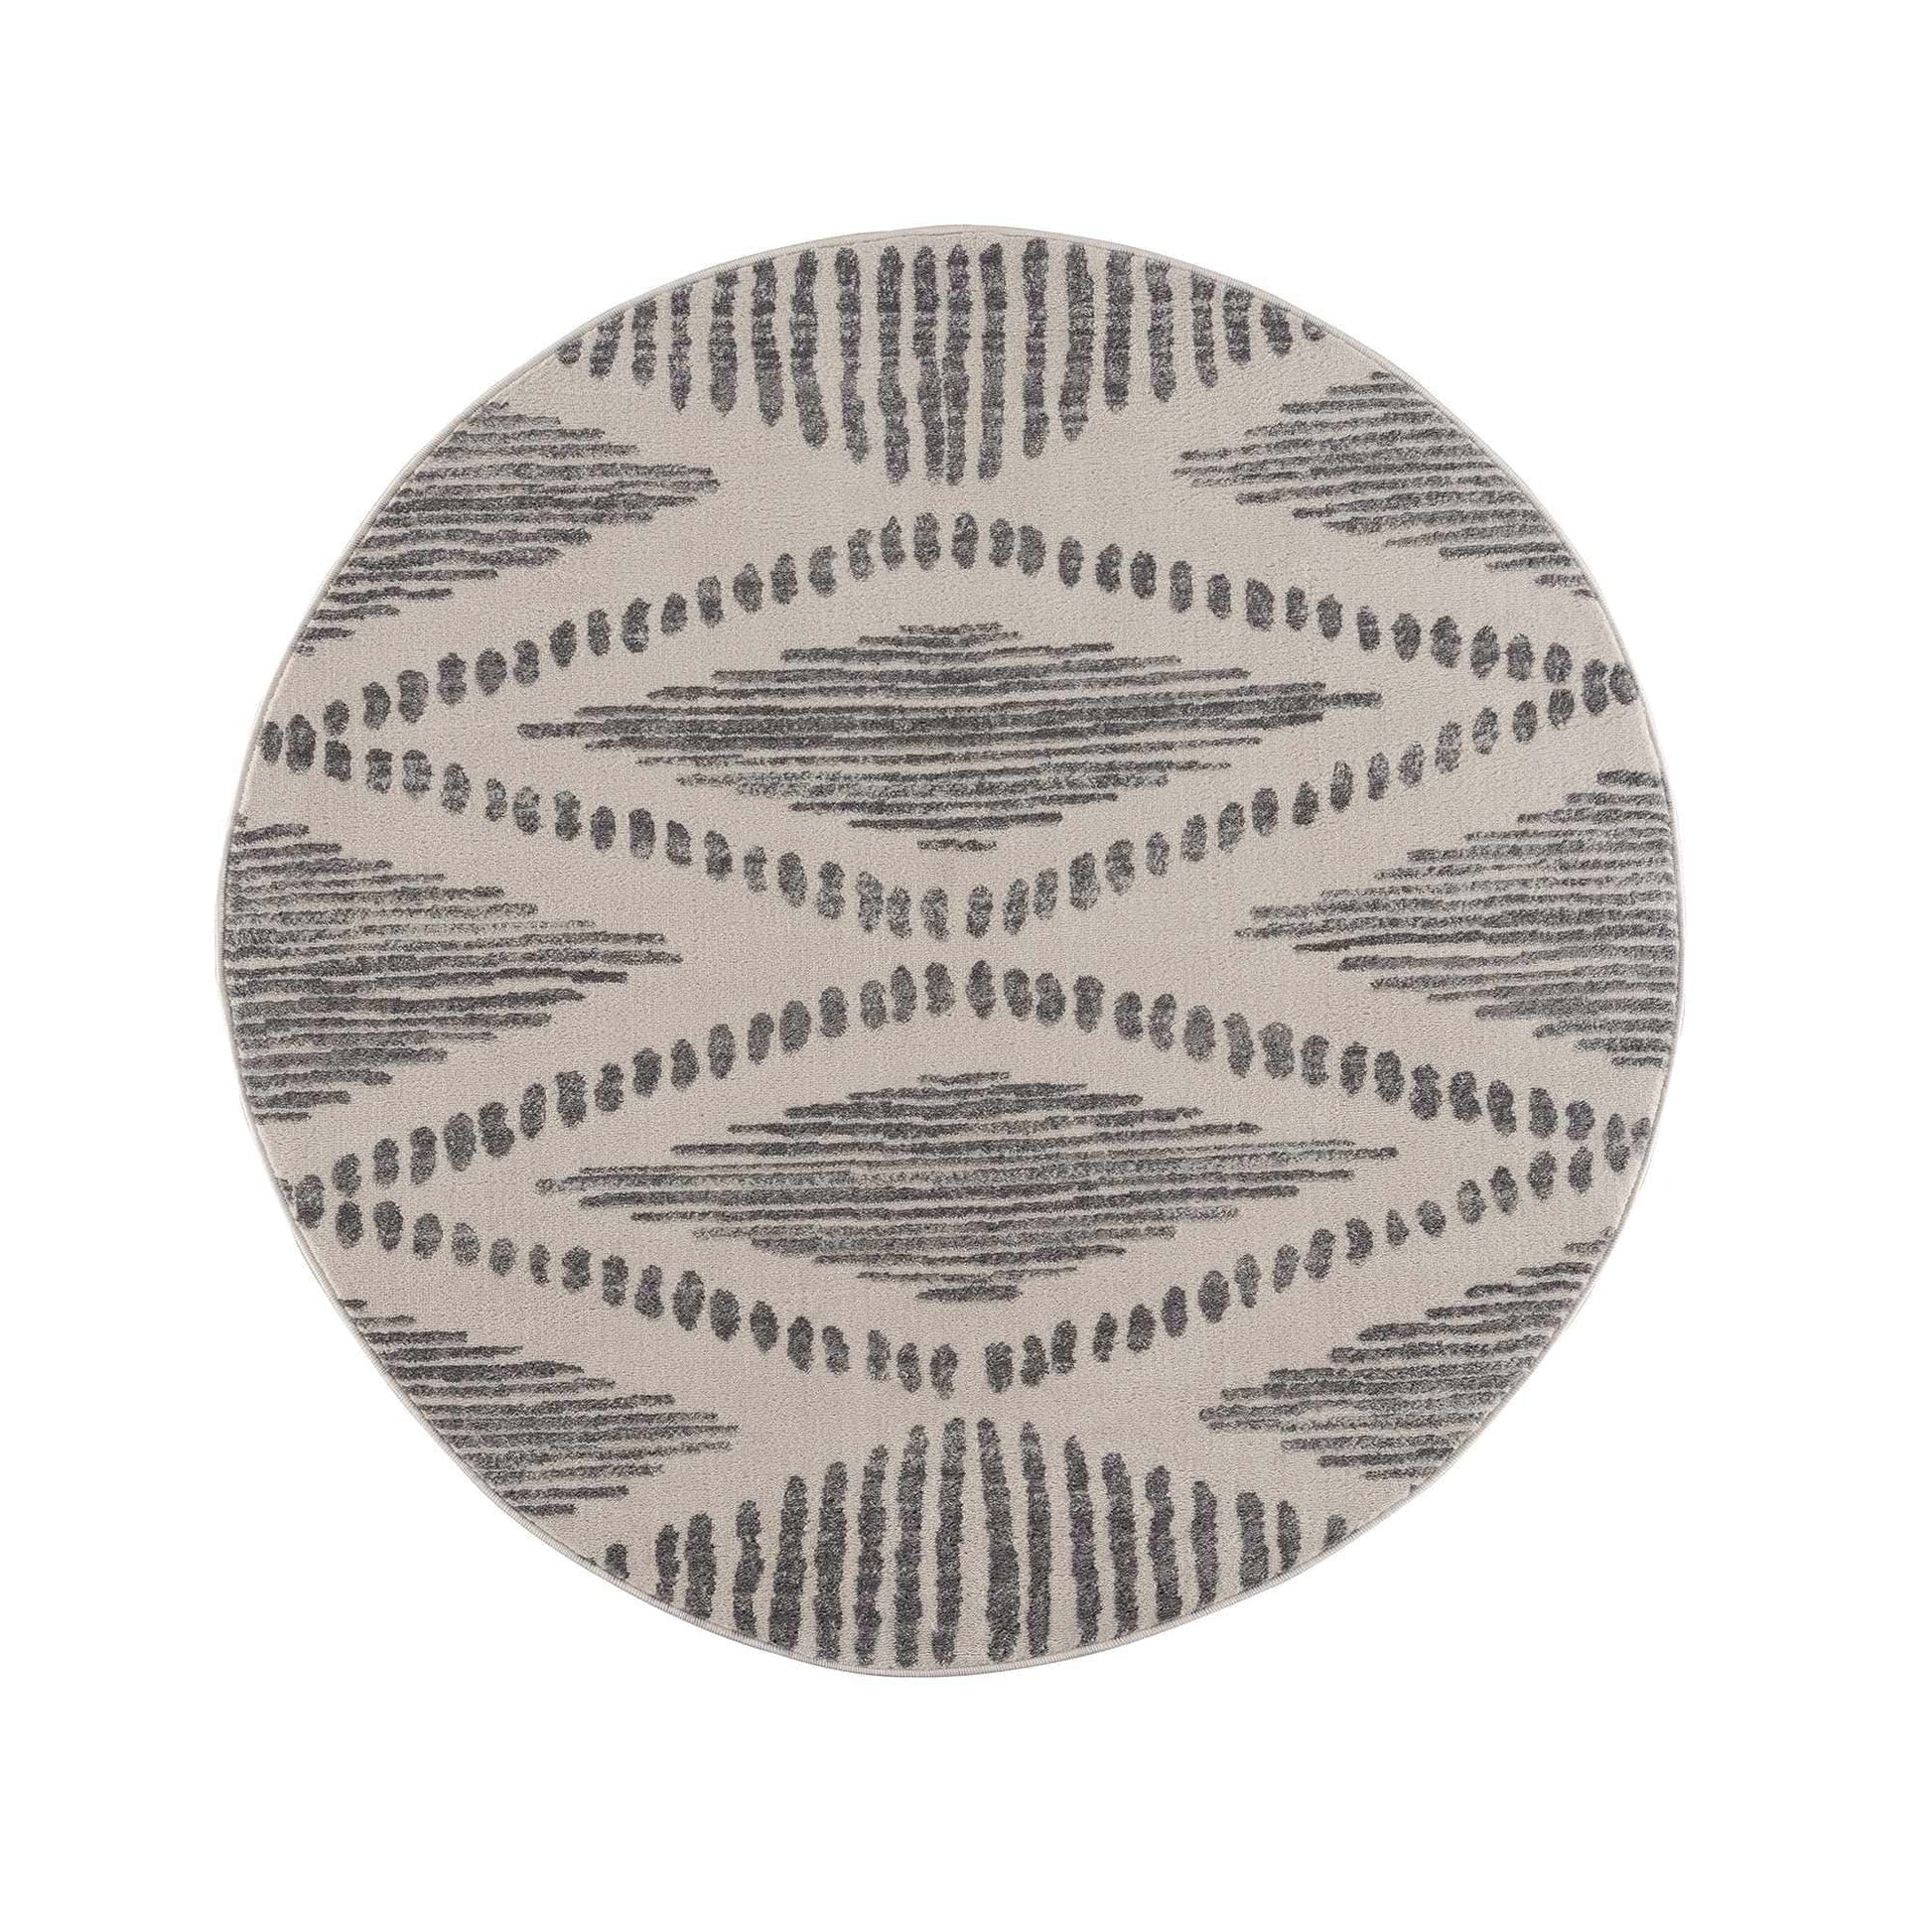 Boutique Rugs Rugs Tigrisis Ivory 2327 Area Rug